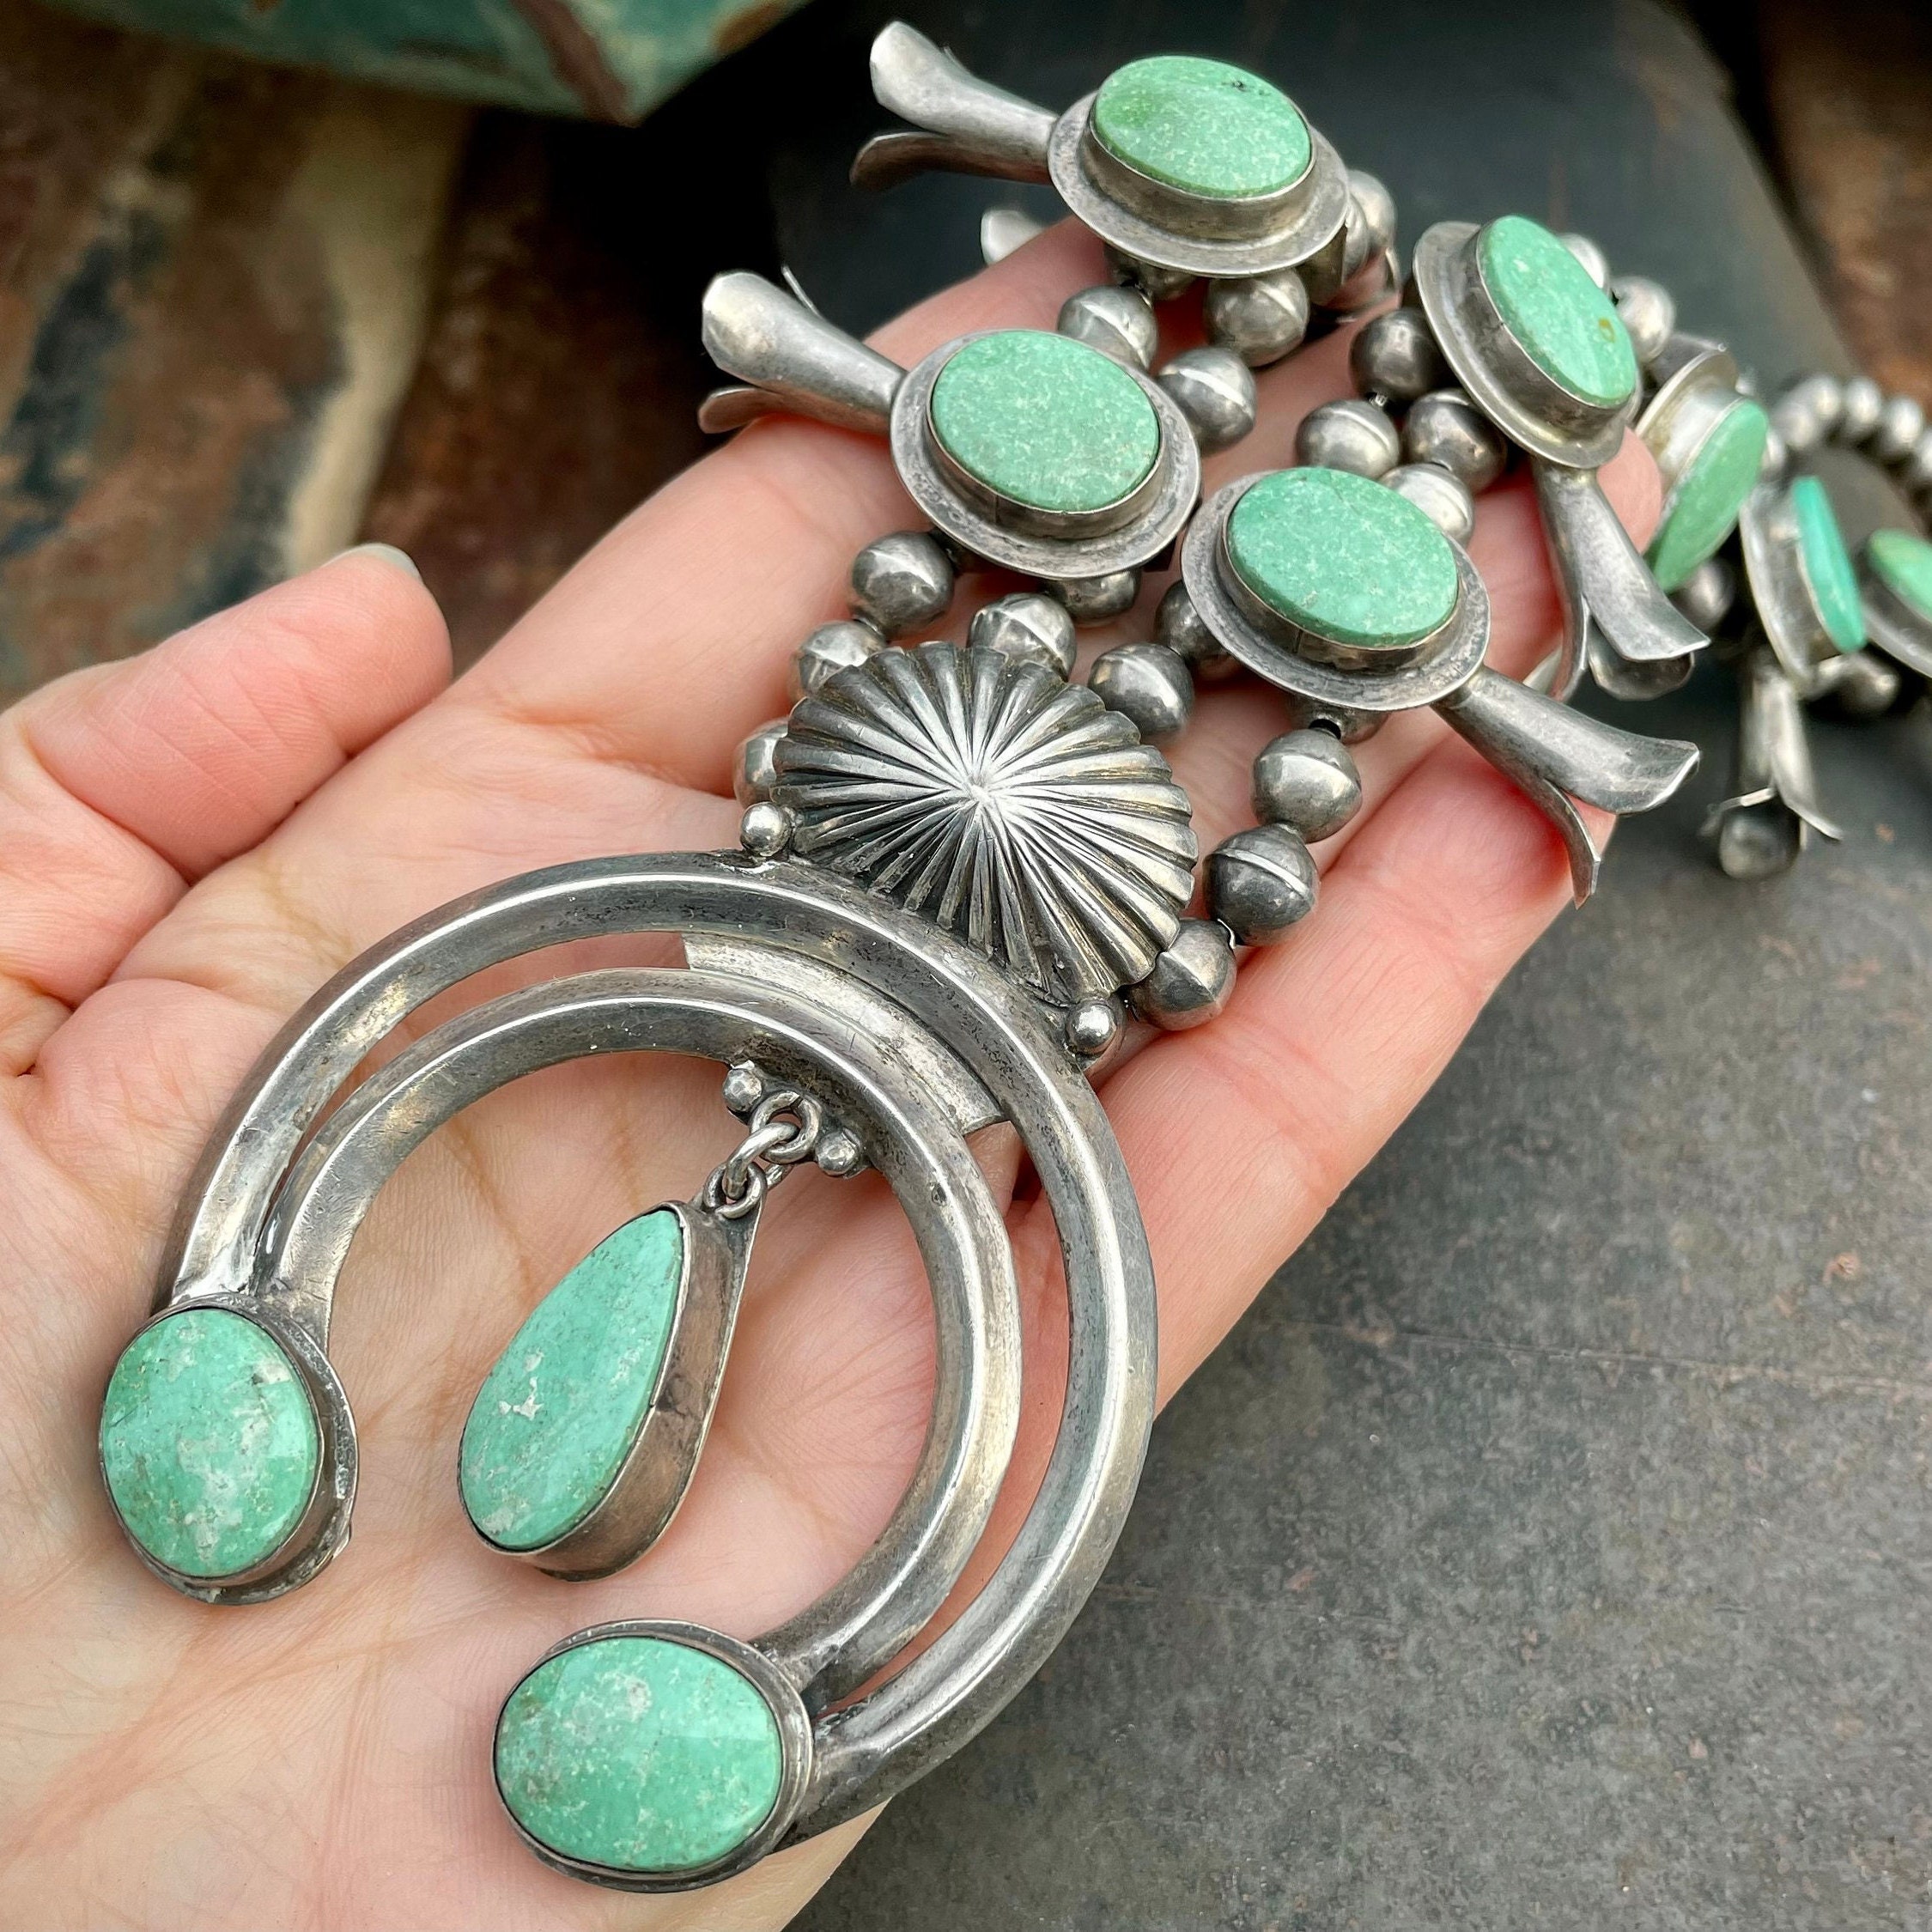 Cleaning a Squash Blossom Necklace - Southwest Silver Gallery